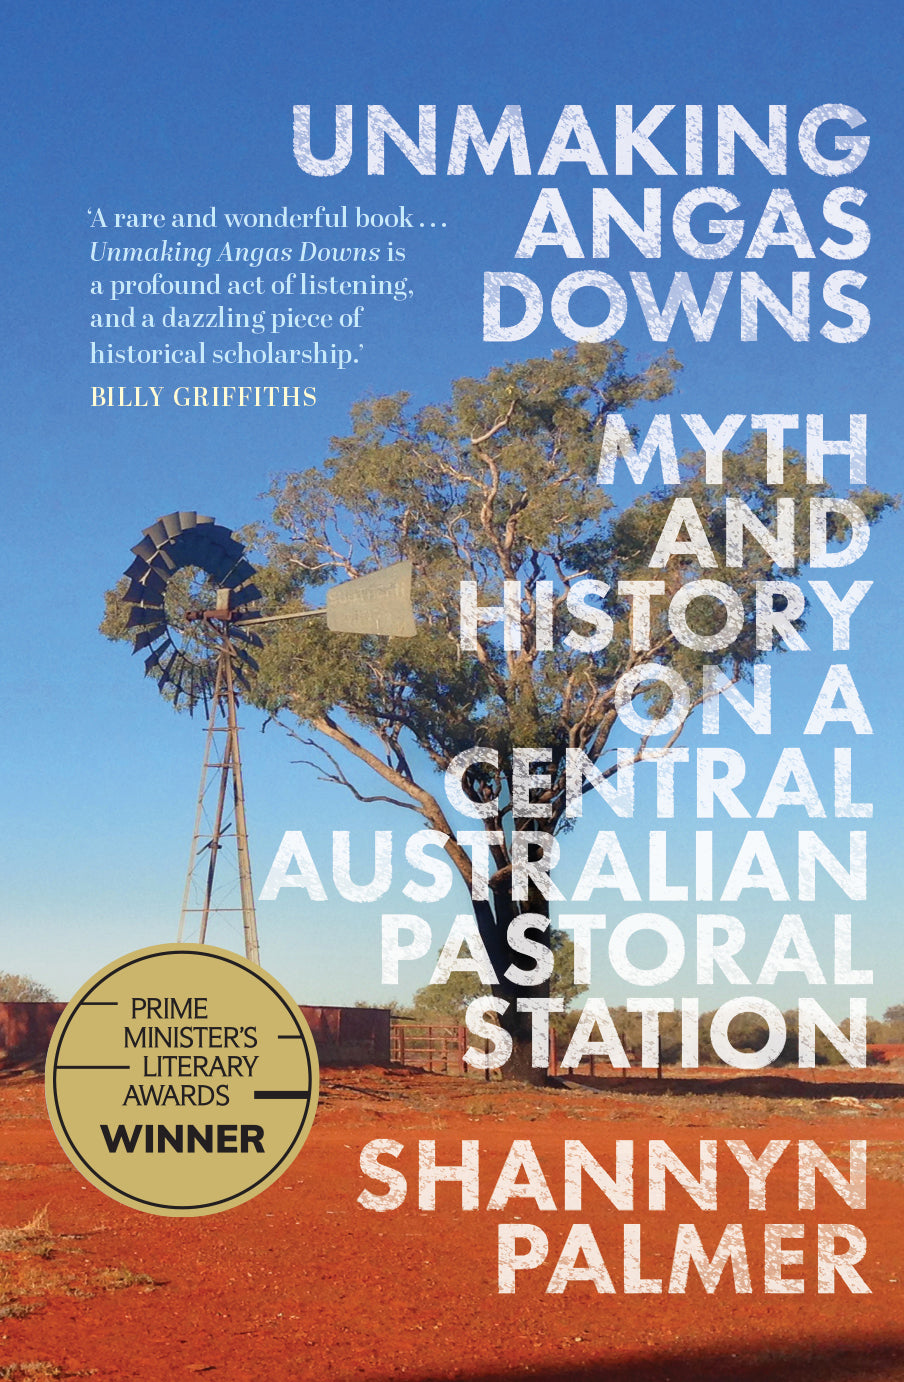 Unmaking Angas Downs Myth and History on a Central Australian Pastoral Station by Shannyn Palmer